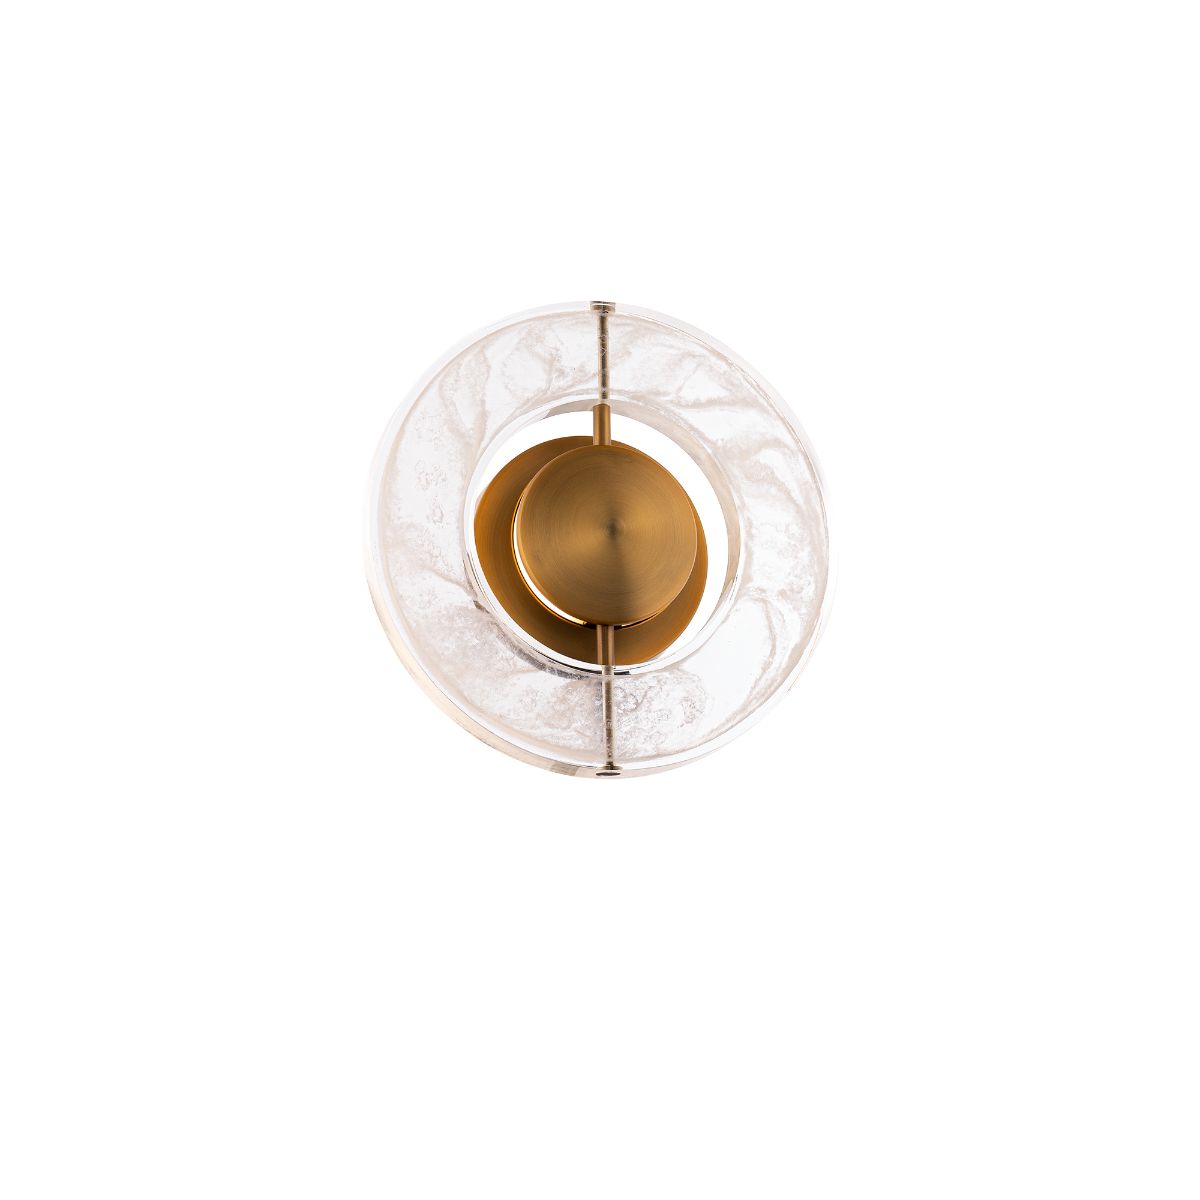 Cymbal 10 in. LED Wall Sconce